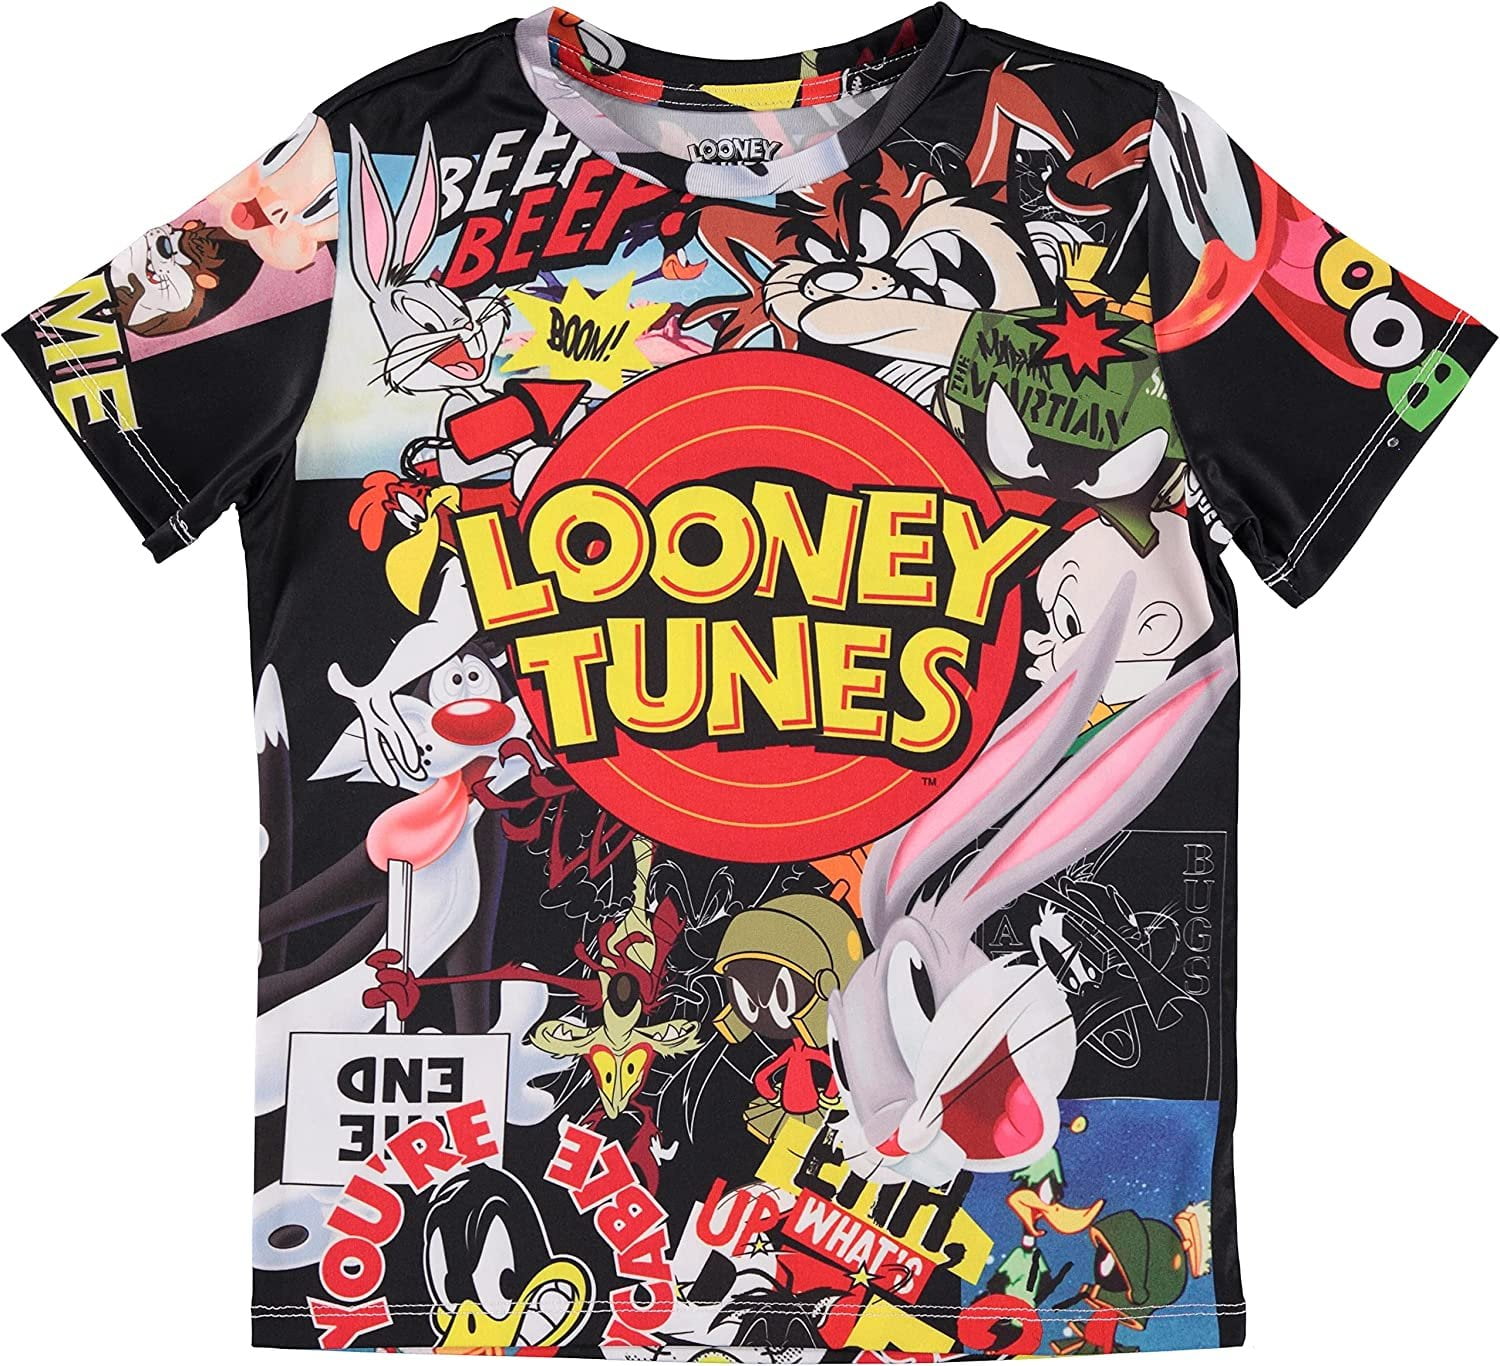 Sublimated Group Bugs - Marvin White, Bunny Tee T-Shirt Taz Looney - 4/5 90s and Allover Tunes Boys Shirt